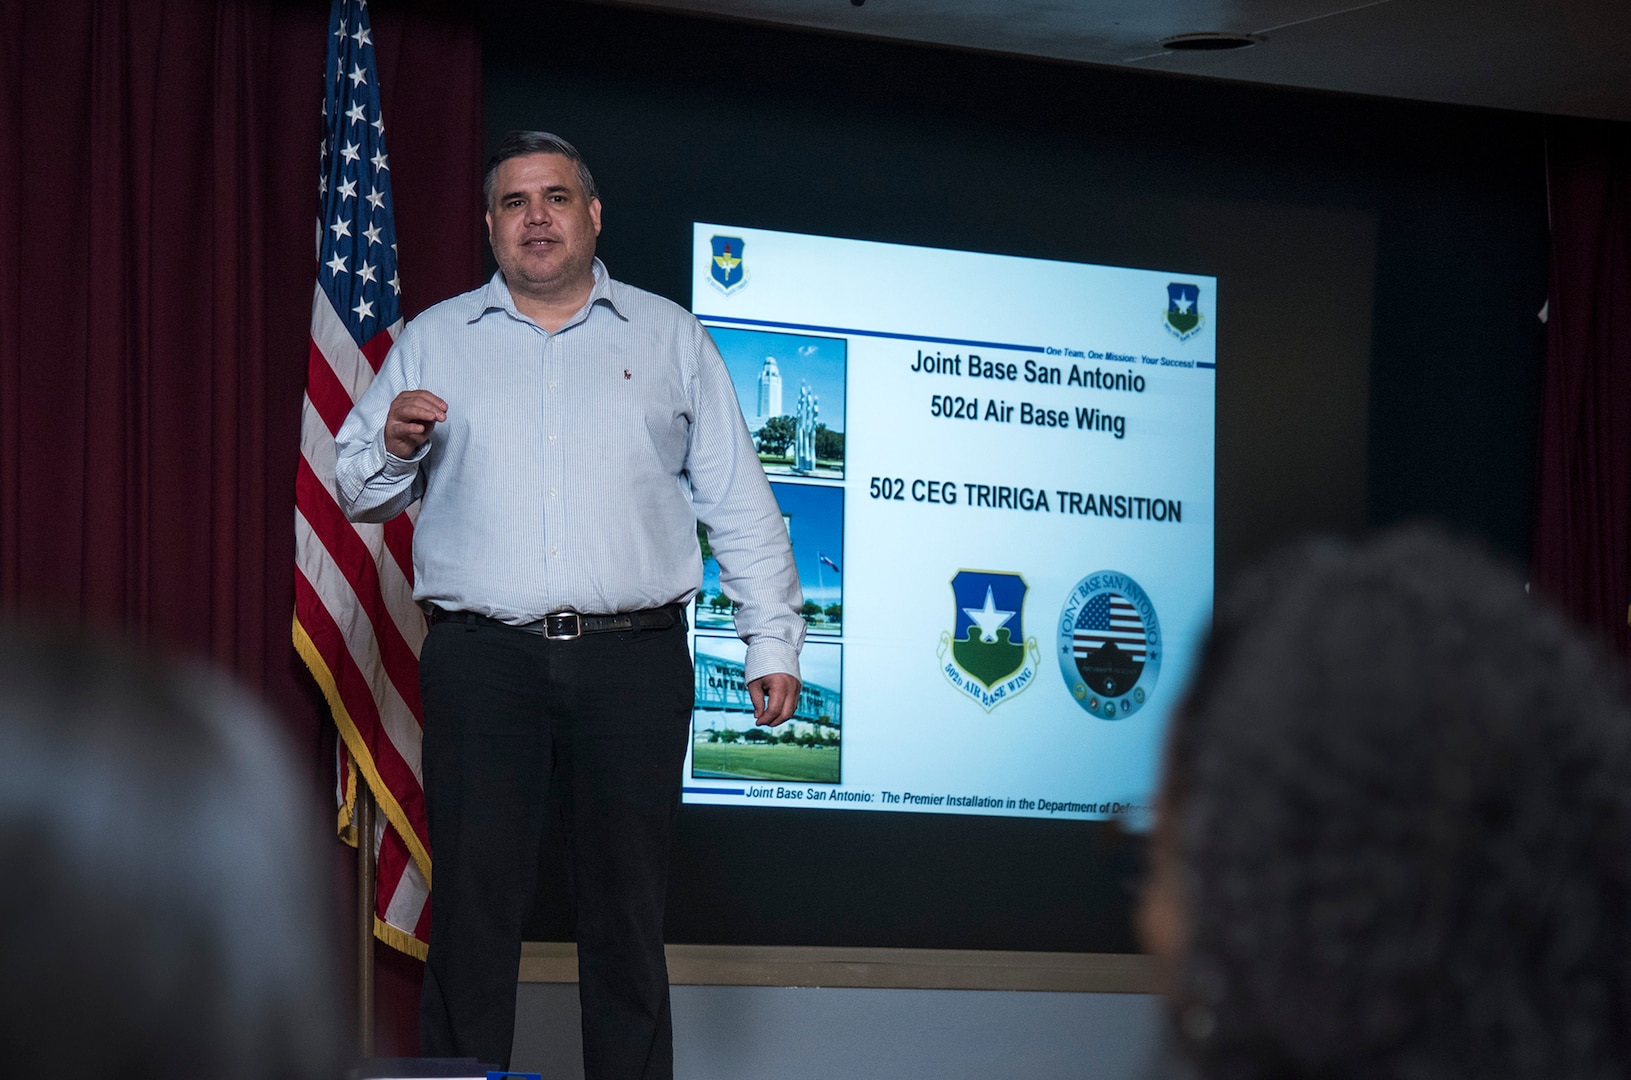 Ramiro Rodriguez, 502 Civil Engineer Squadron TRIRIGA customer support technician, informs Joint Base San Antonio Airmen and civilians on the TRIRIGA Work Management system during a class Jan. 25, 2019 at Joint Base San Antonio, Lackland, Texas. The software will centralize and integrate critical facility management processes to manage a distributed workforce, increase the utilization of physical facilities, and configure Civil Engineer operating capability. The system replaces legacy IT systems like the Interim Work Information Management System, or IWIMS, and the Automated Civil Engineer System, or ACES, modules for real property, project, housing and financial management.